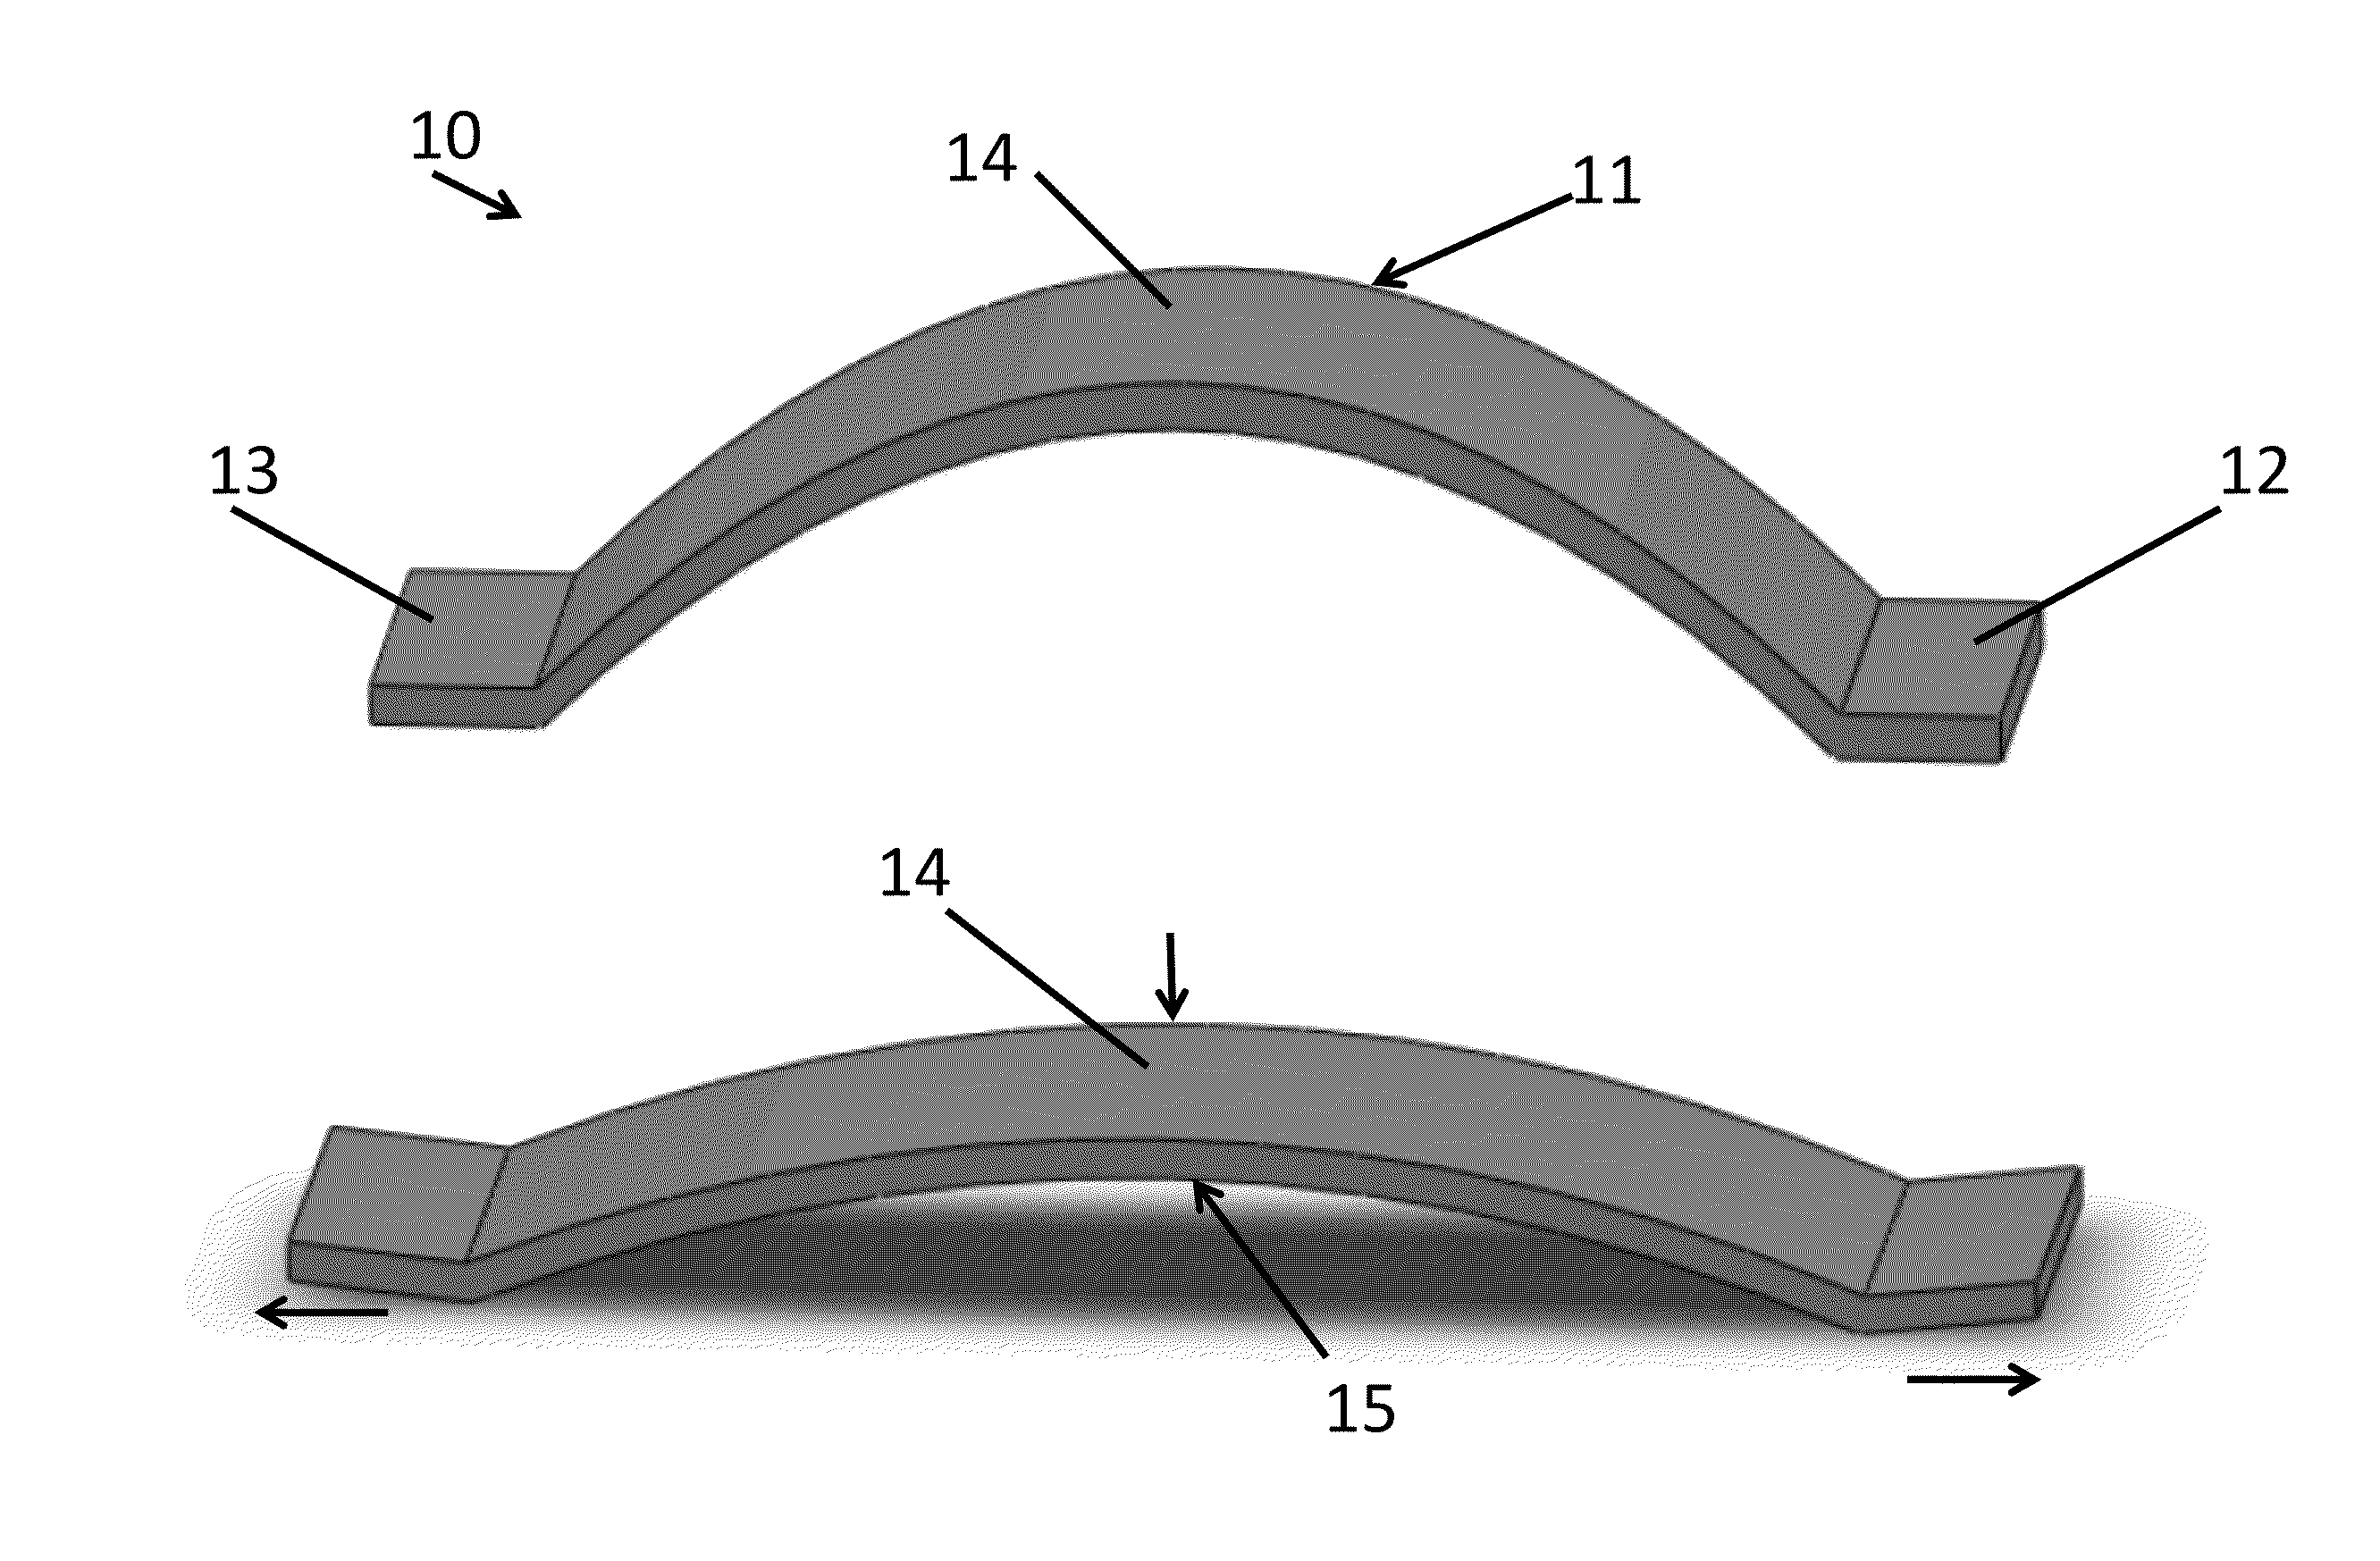 Carbon Fiber Composite Springs And Method of Making Thereof